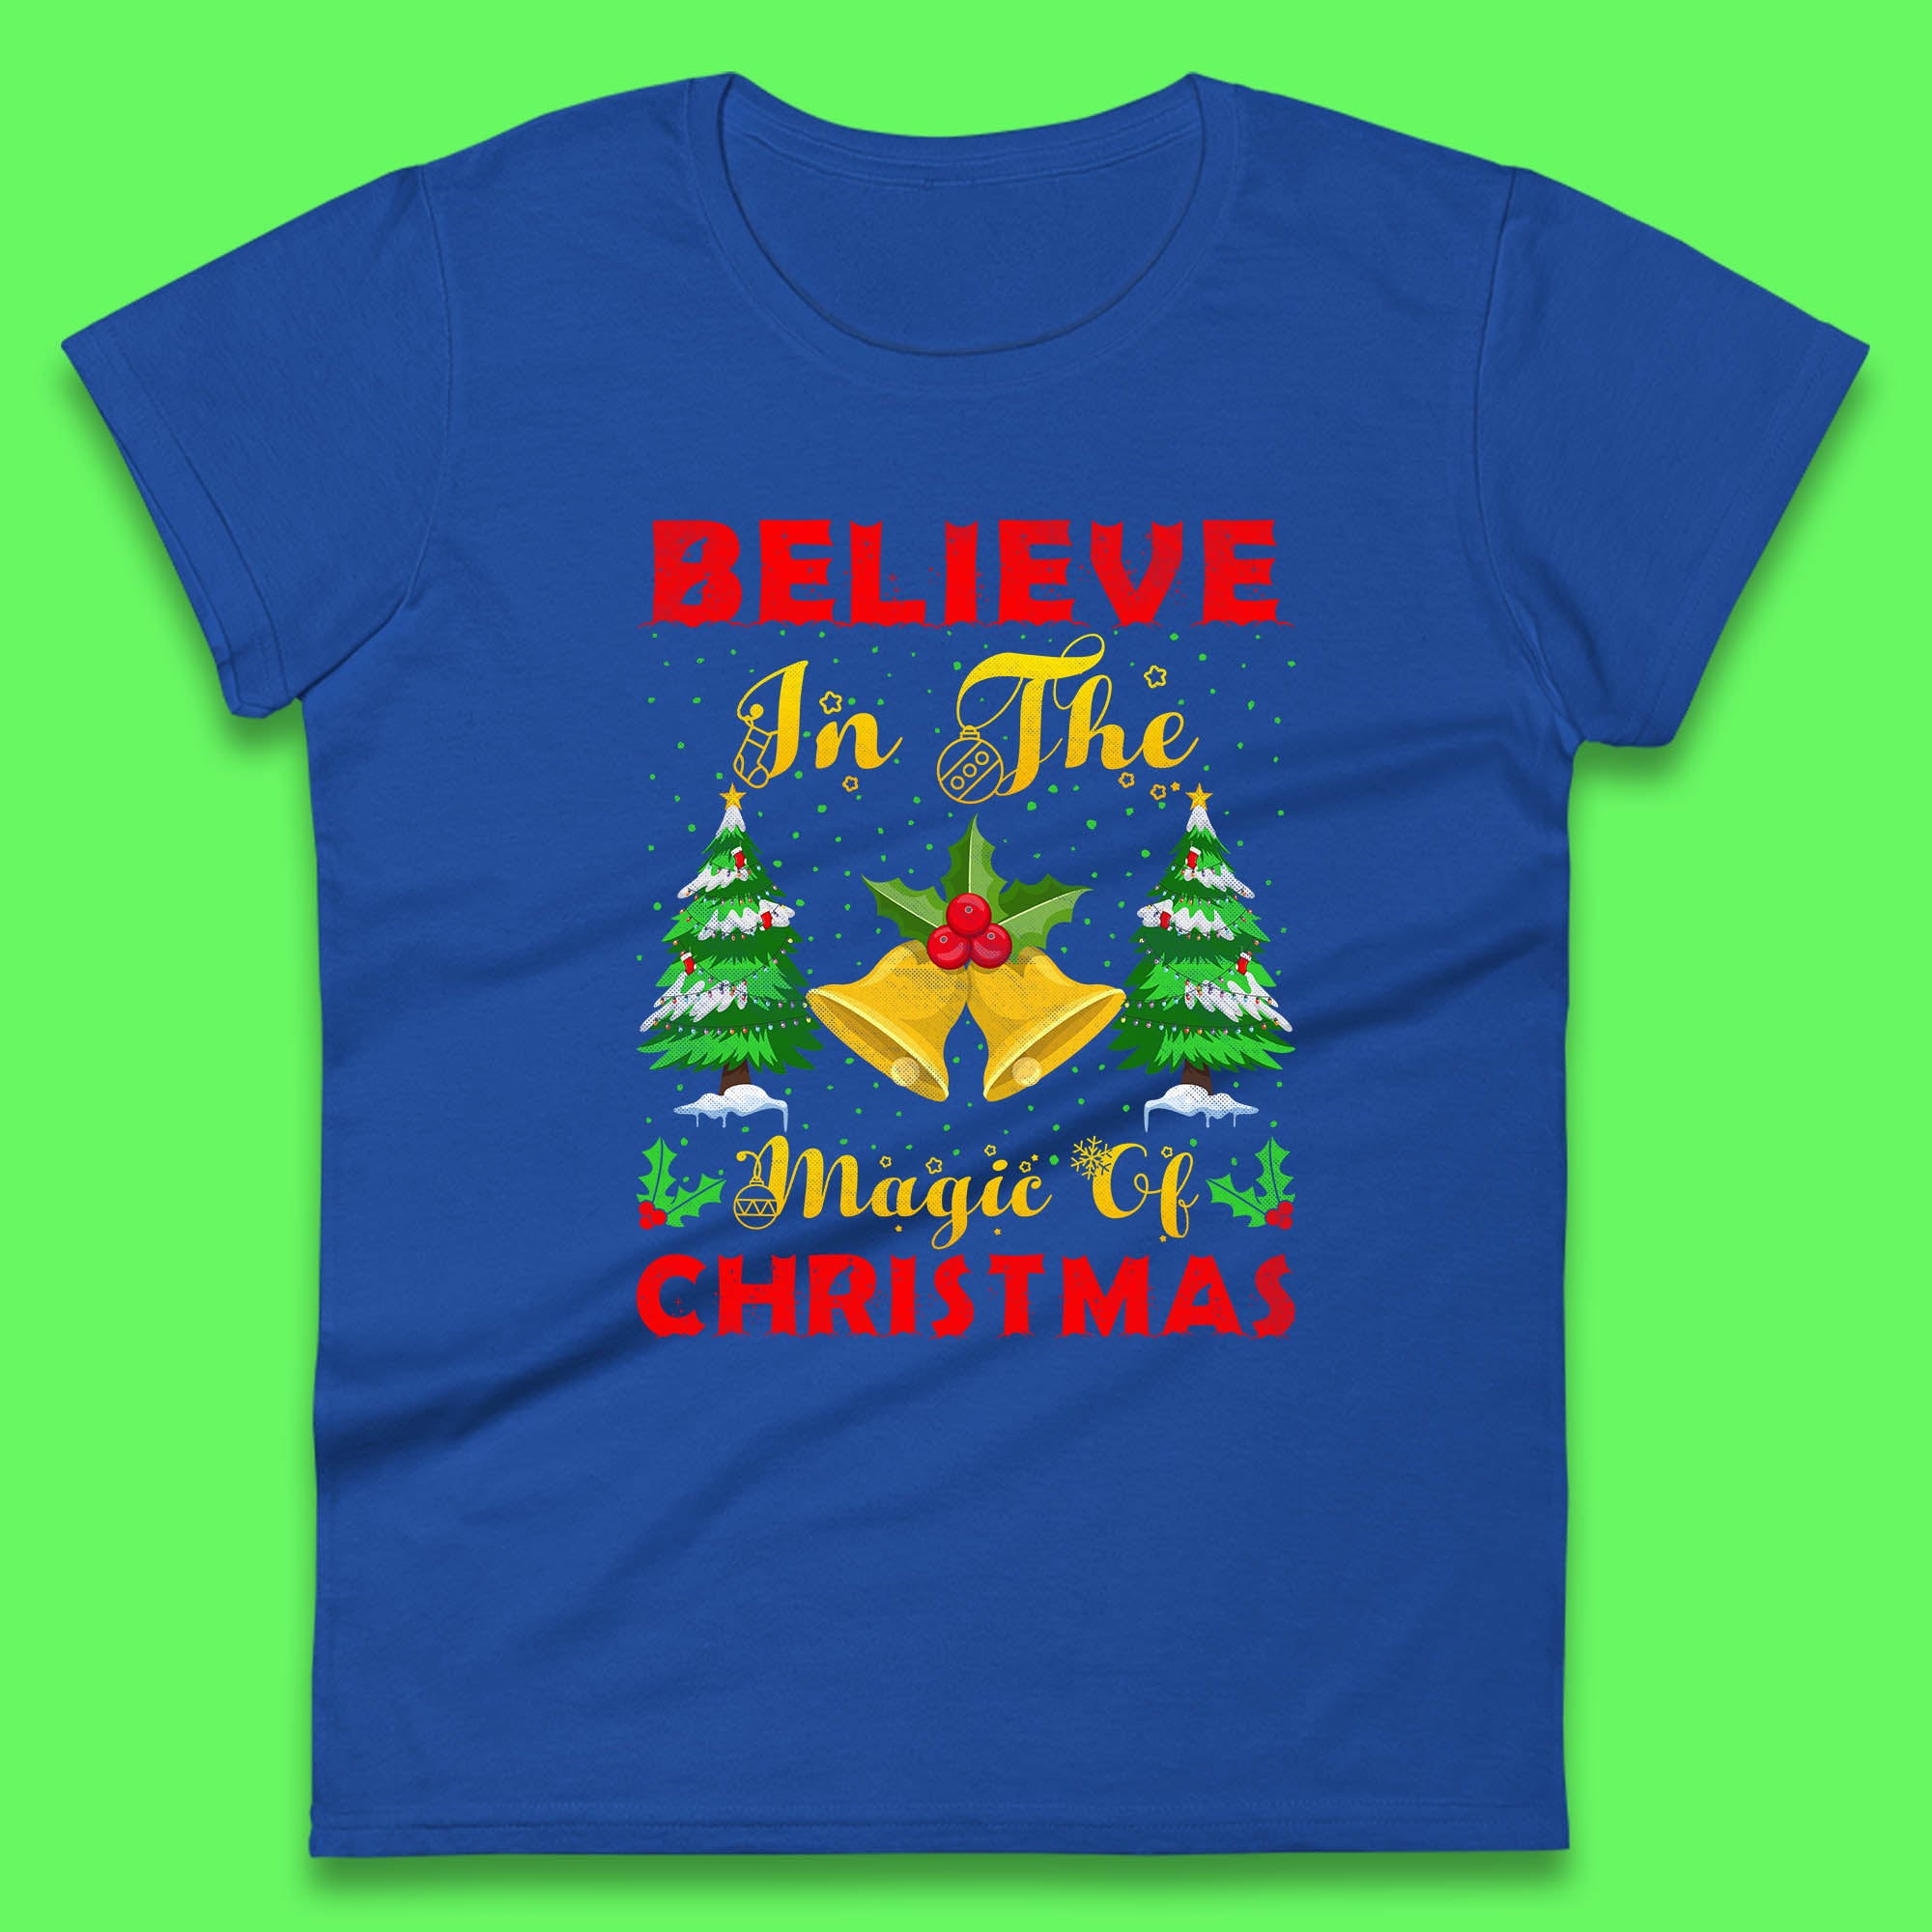 Believe In The Magic Of Christmas Funny Xmas Holiday Festive Womens Tee Top